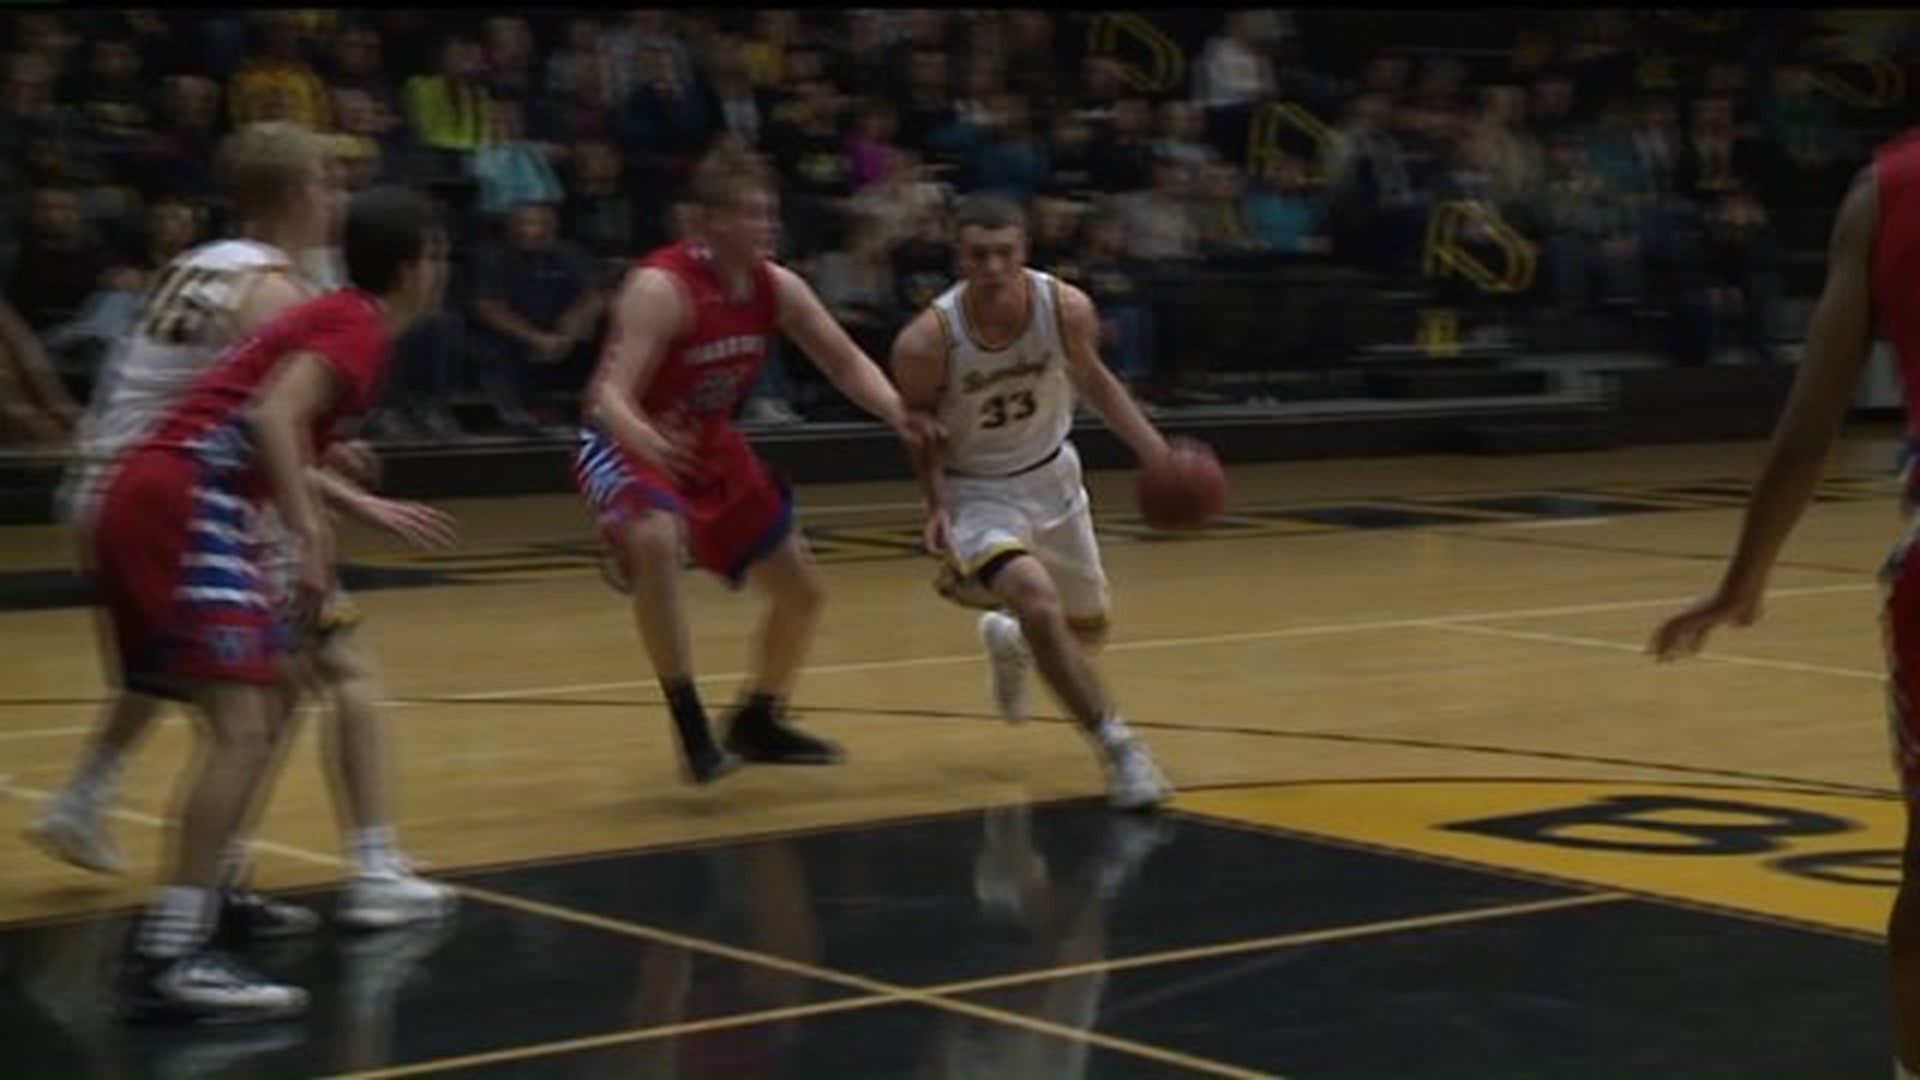 Bettendorf win gives team confidence